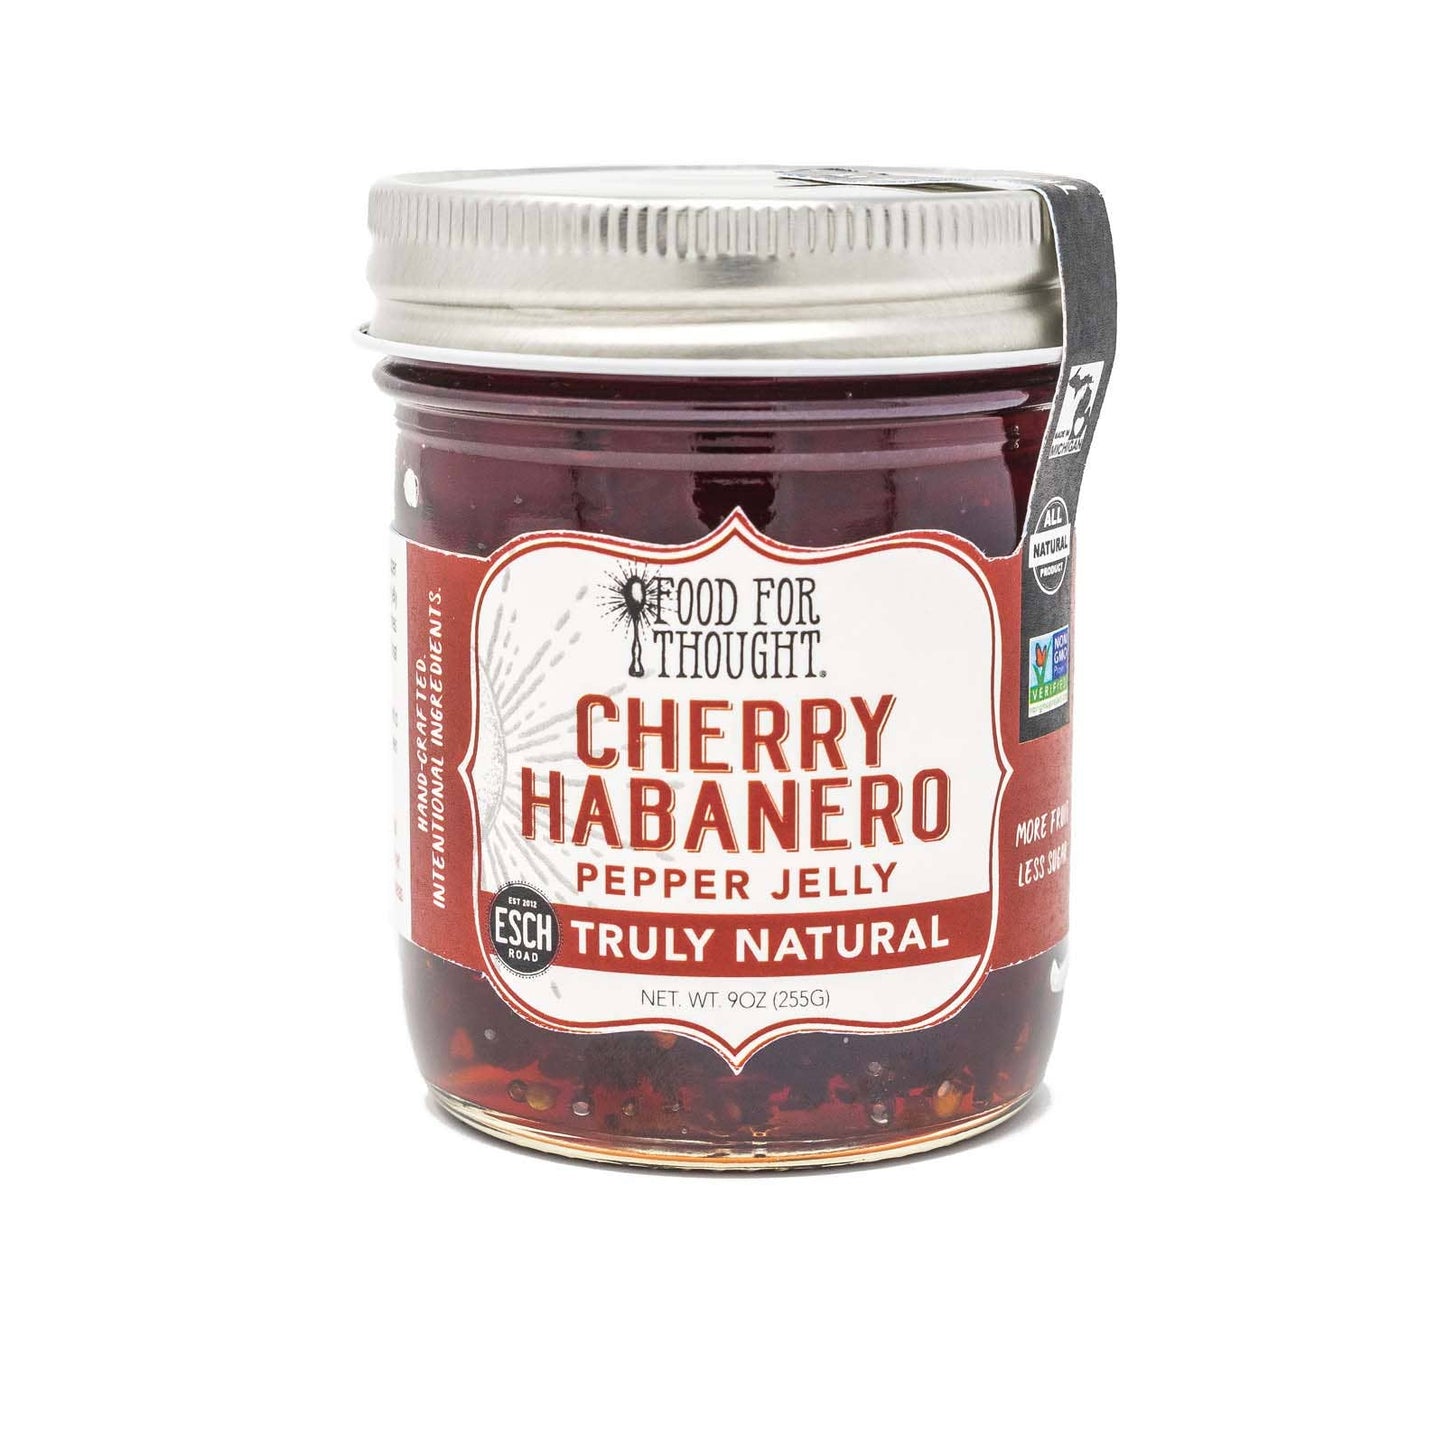 Truly Natural Cherry Habanero Pepper Jelly